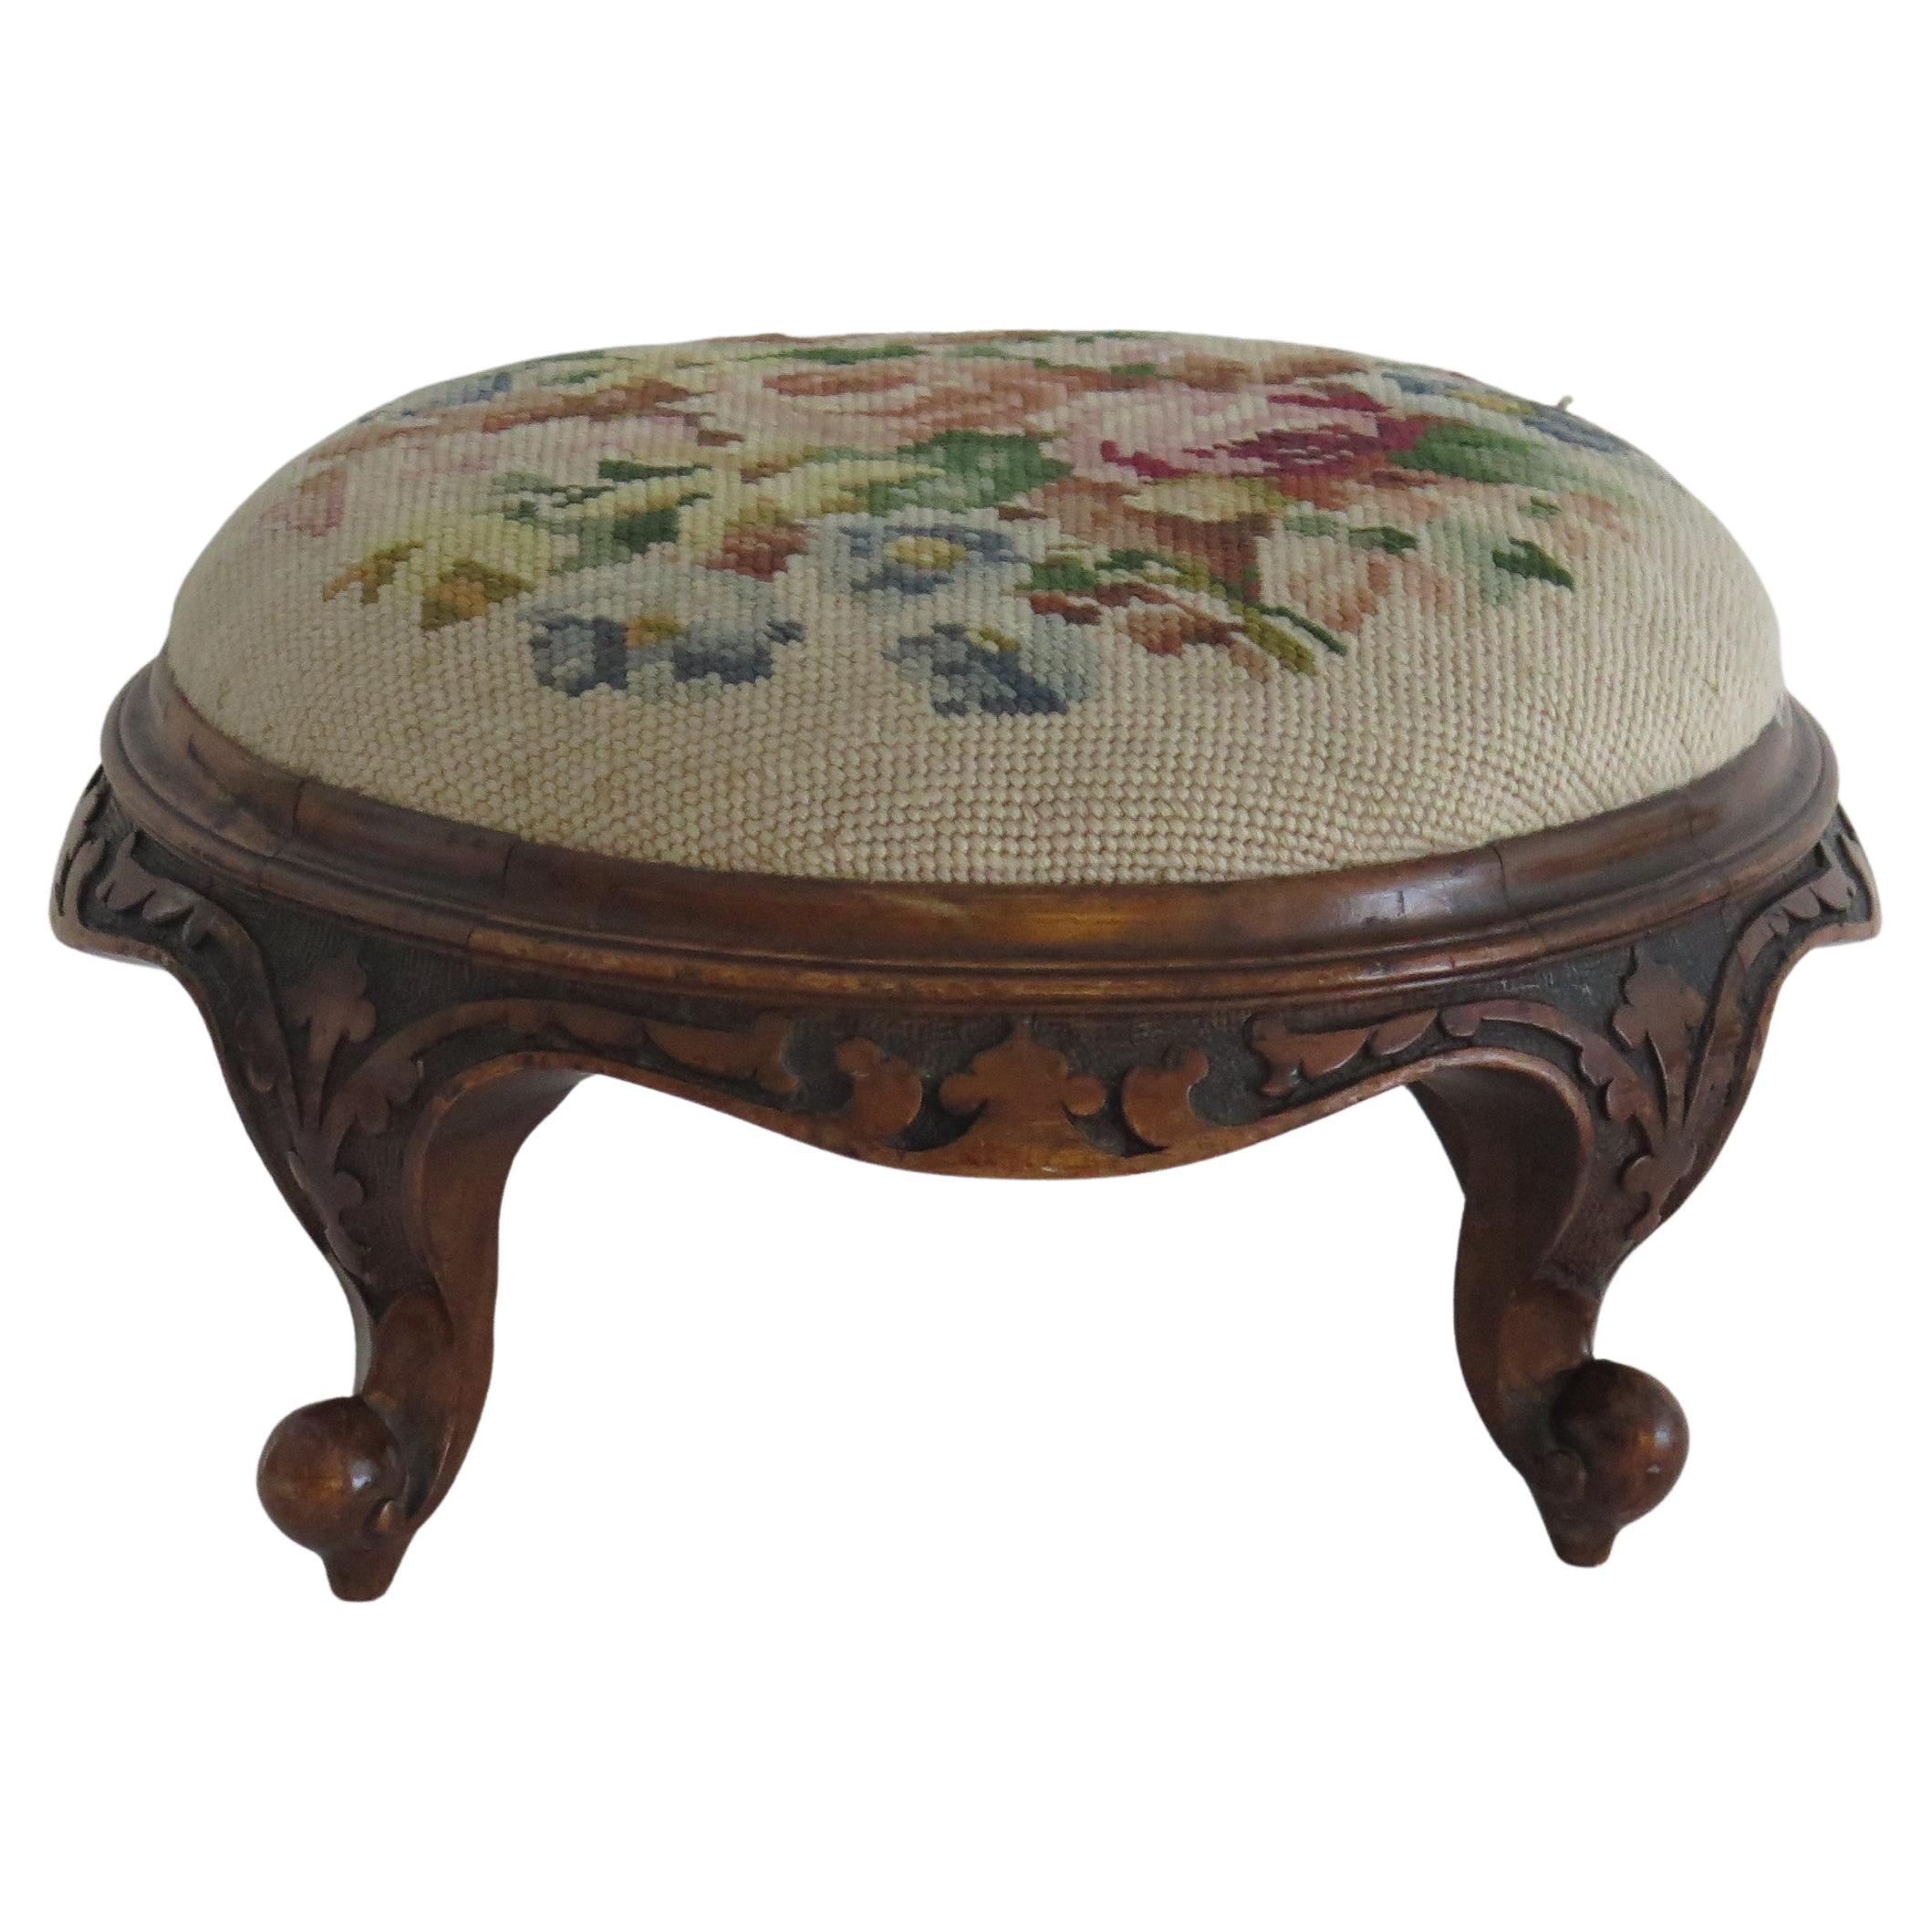 This is a very good quality English Walnut Footstool with a woolwork top, circa 1850

The stool has a nominally circular shape with a well hand carved walnut frame having four short cabriole legs, typical of the mid Victorian period. The hand